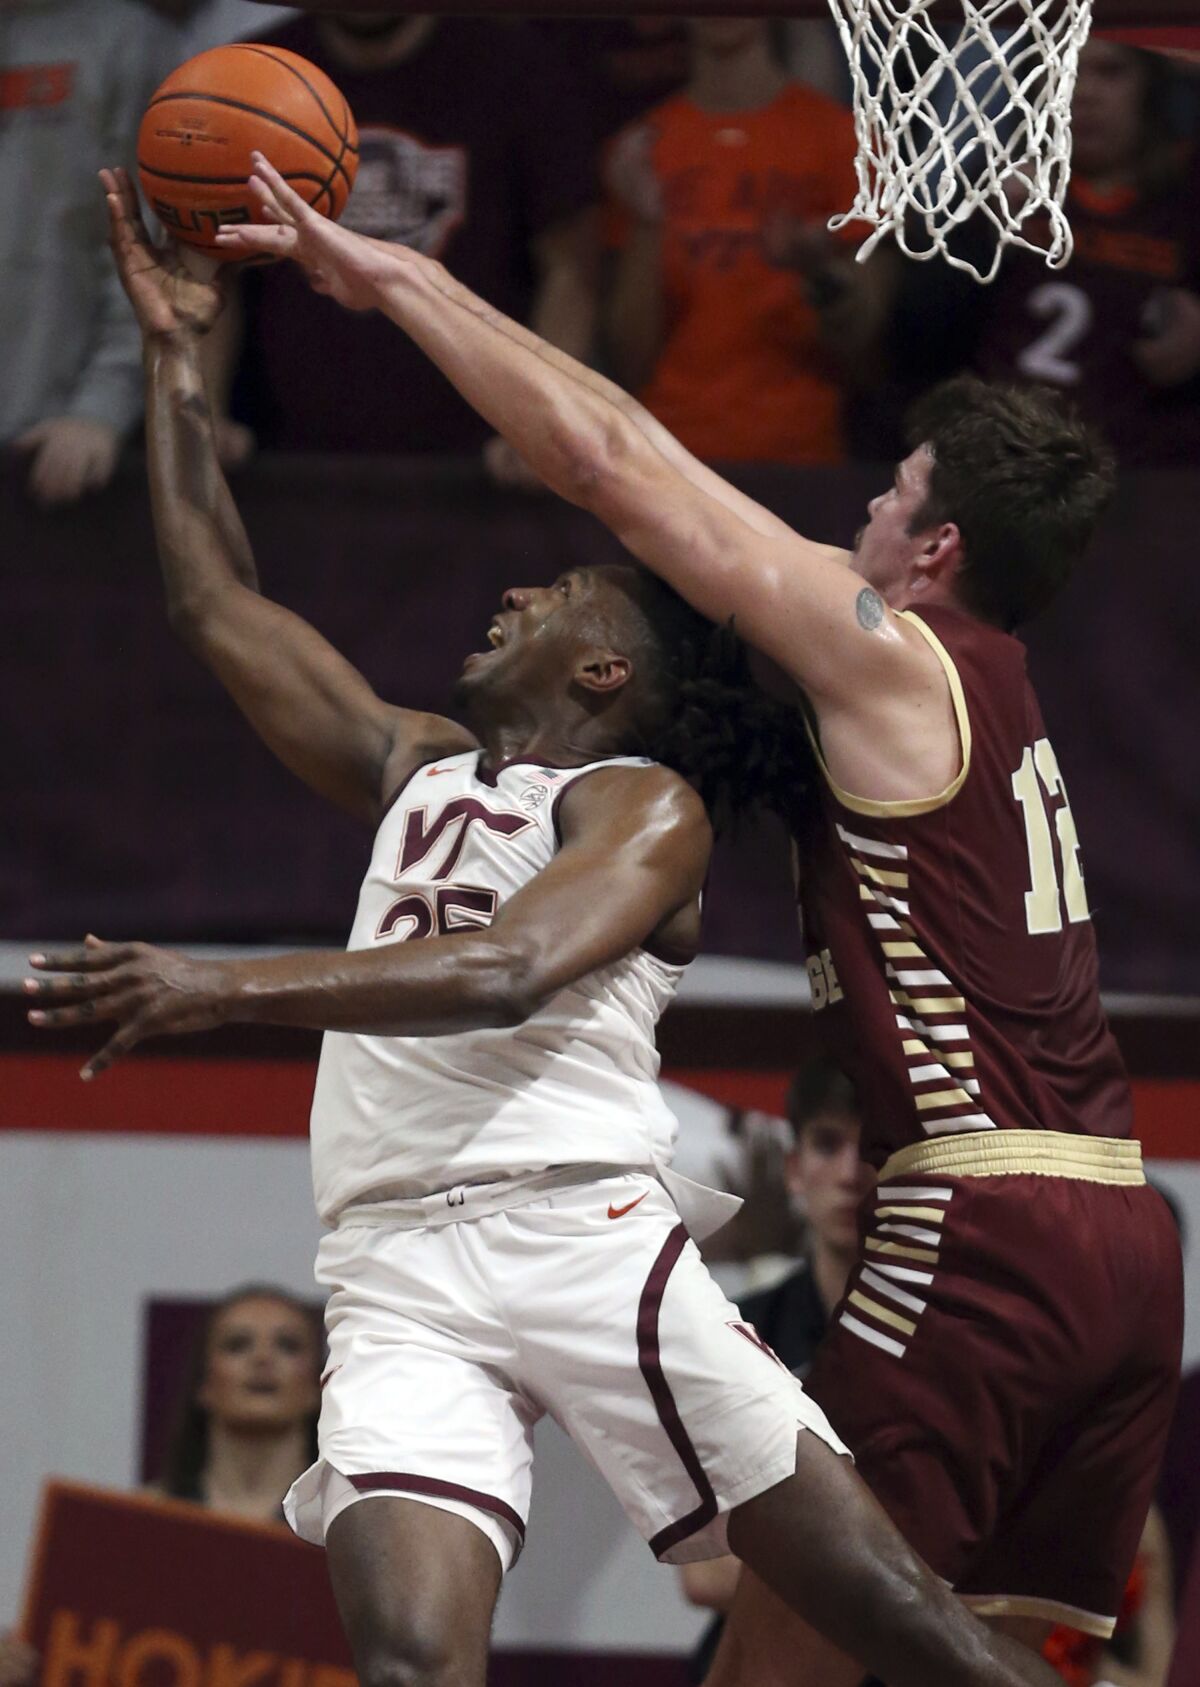 Virginia Tech's Justyn Mutts (25) left, has his shot blocked and is fouled by Boston College's Quinten Post (12) during the first half of an NCAA college basketball game Wednesday, Feb. 8, 2023, in Blacksburg, Va. (Matt Gentry/The Roanoke Times via AP)